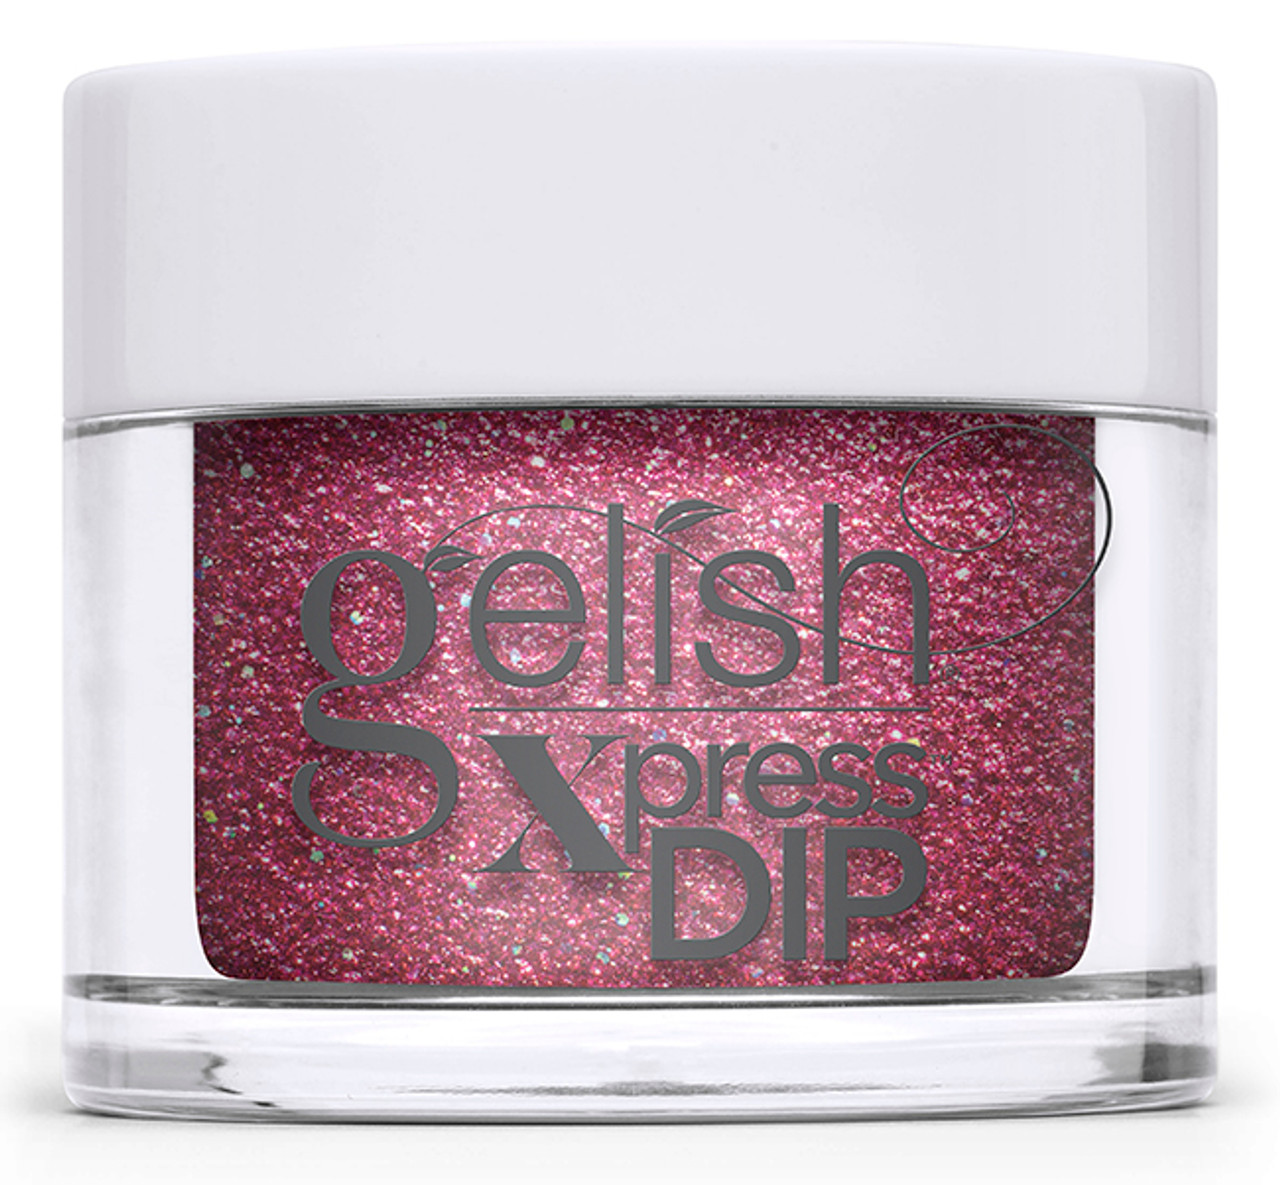 Gelish Xpress Dip All Tied Up With A Bow - 1.5 oz / 43 g